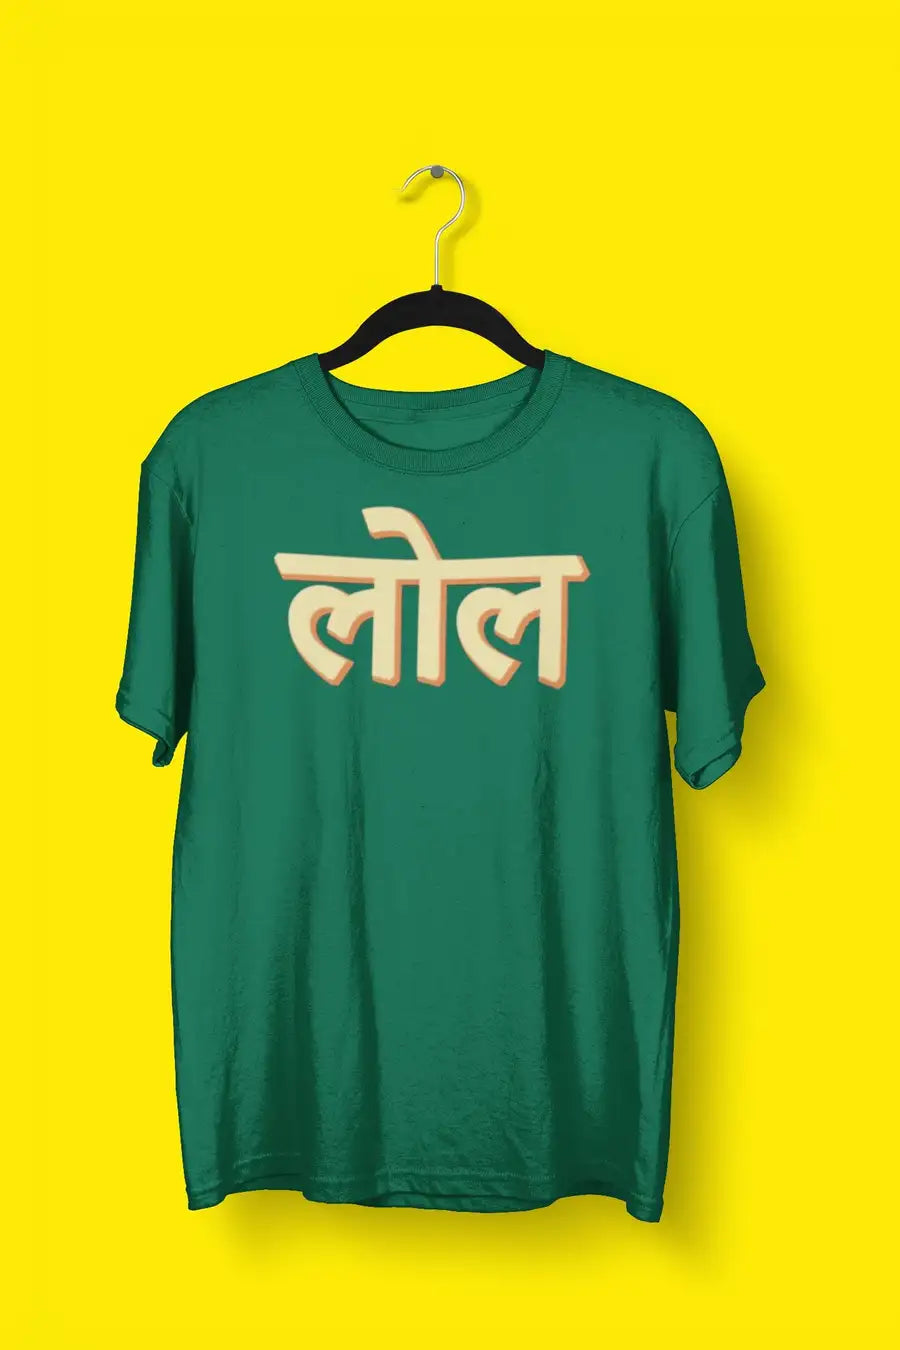 LOL Funny T Shirt for Men and Women | Premium Design | Catch My Drift India - Catch My Drift India Clothing black, bollywood, clothing, engineer, engineering, funny, made in india, multi colo